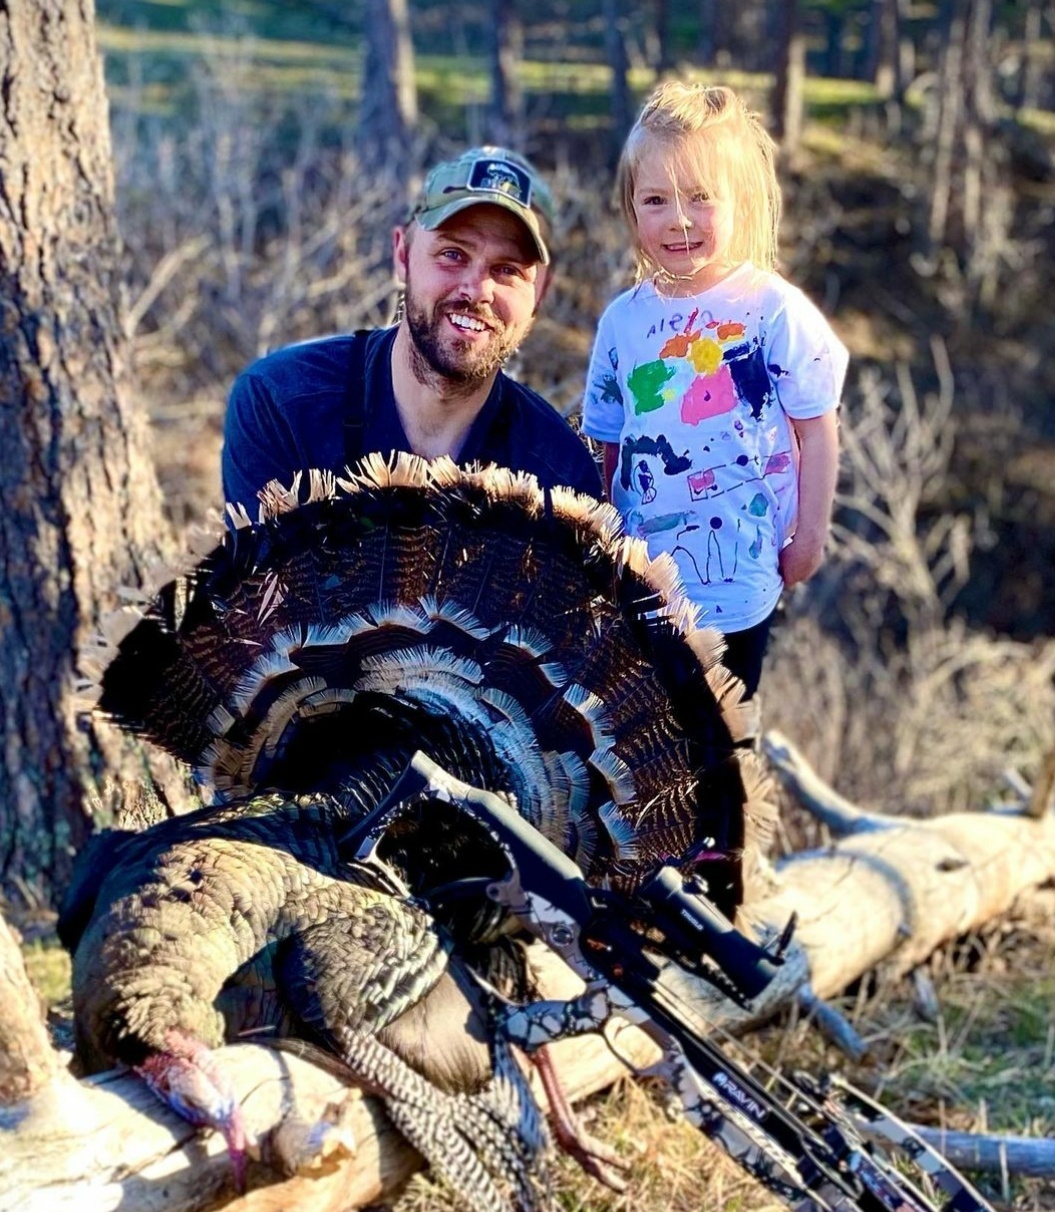 Crossbows are Ideal for Getting Young Kids into Hunting | Outdoor Life